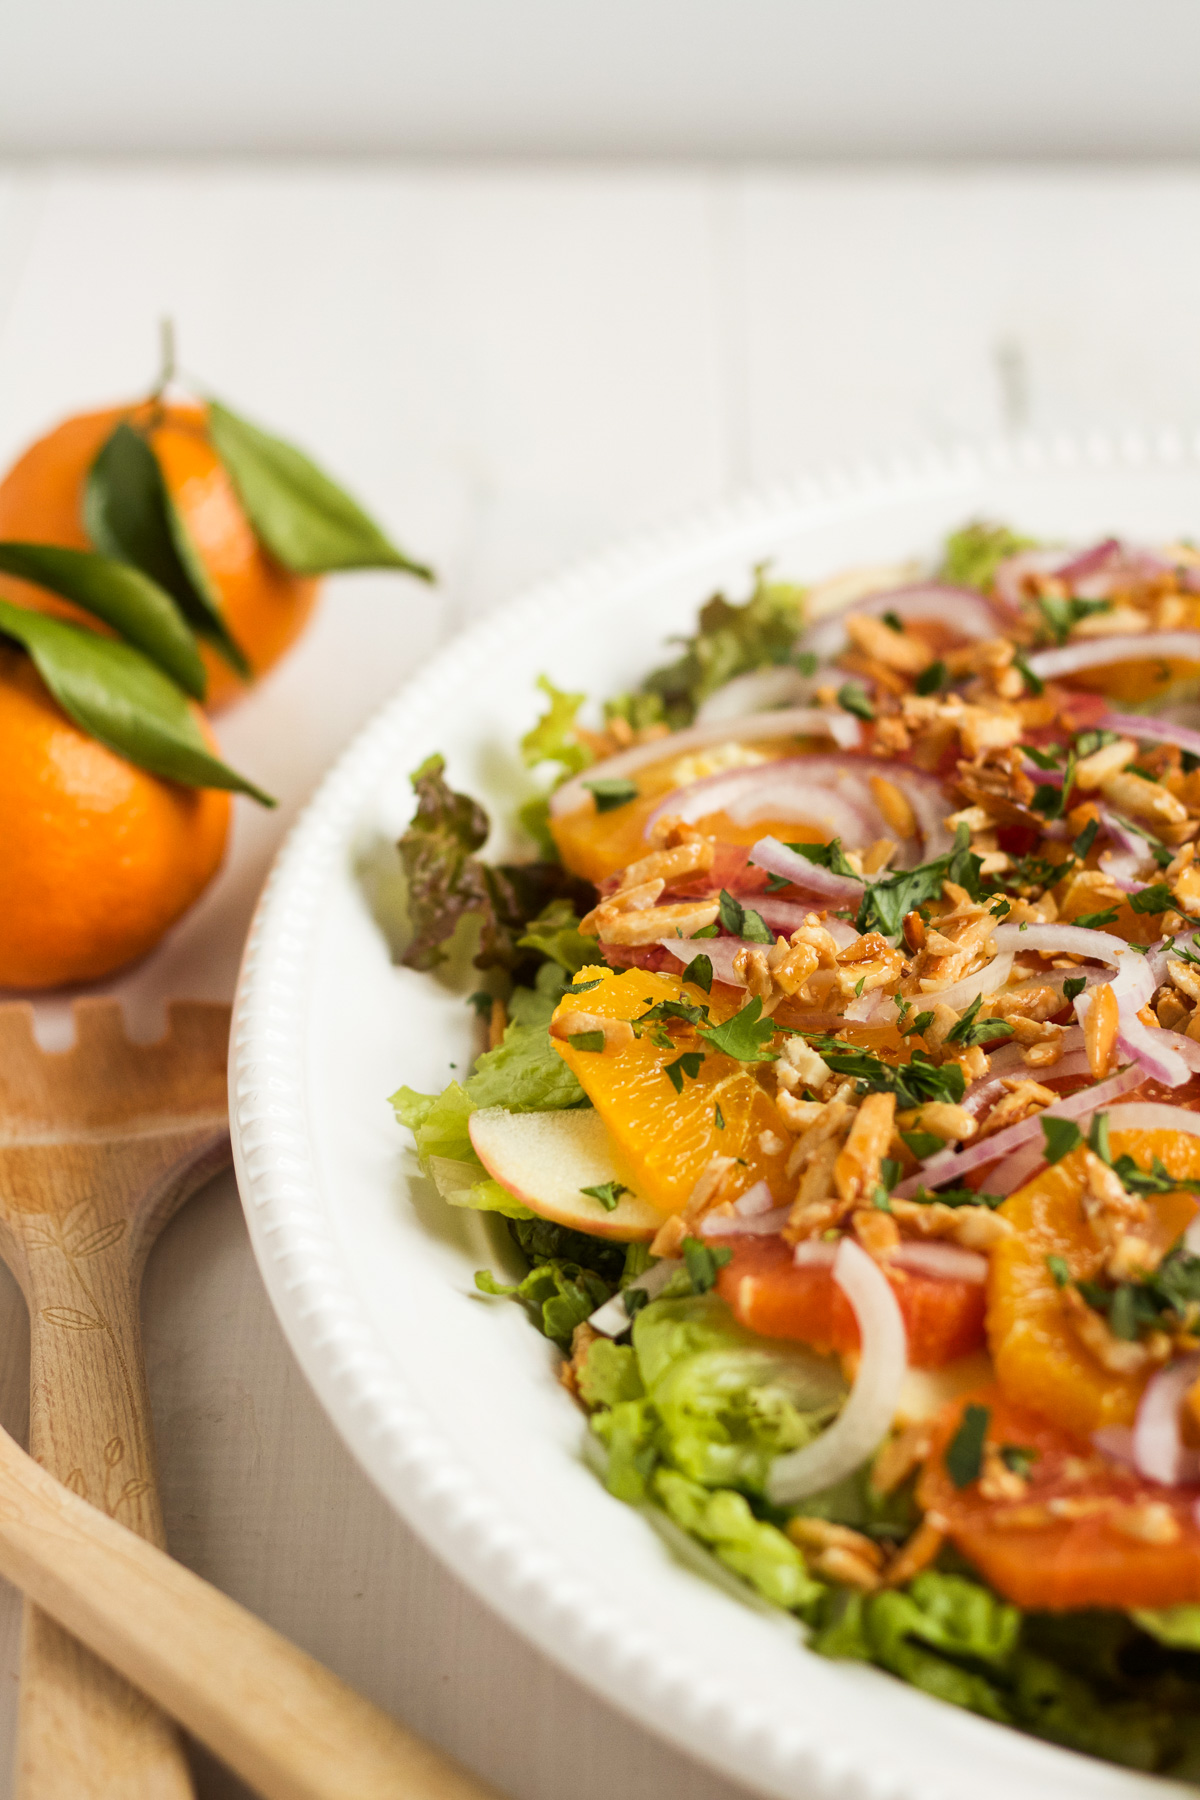 This salad is a family favorite! Tender red leaf lettuce salad is topped with thinly sliced apples, fresh oranges, red onions, and homemade sugared almonds, with an herby, from-scratch vinaigrette to top it all off.